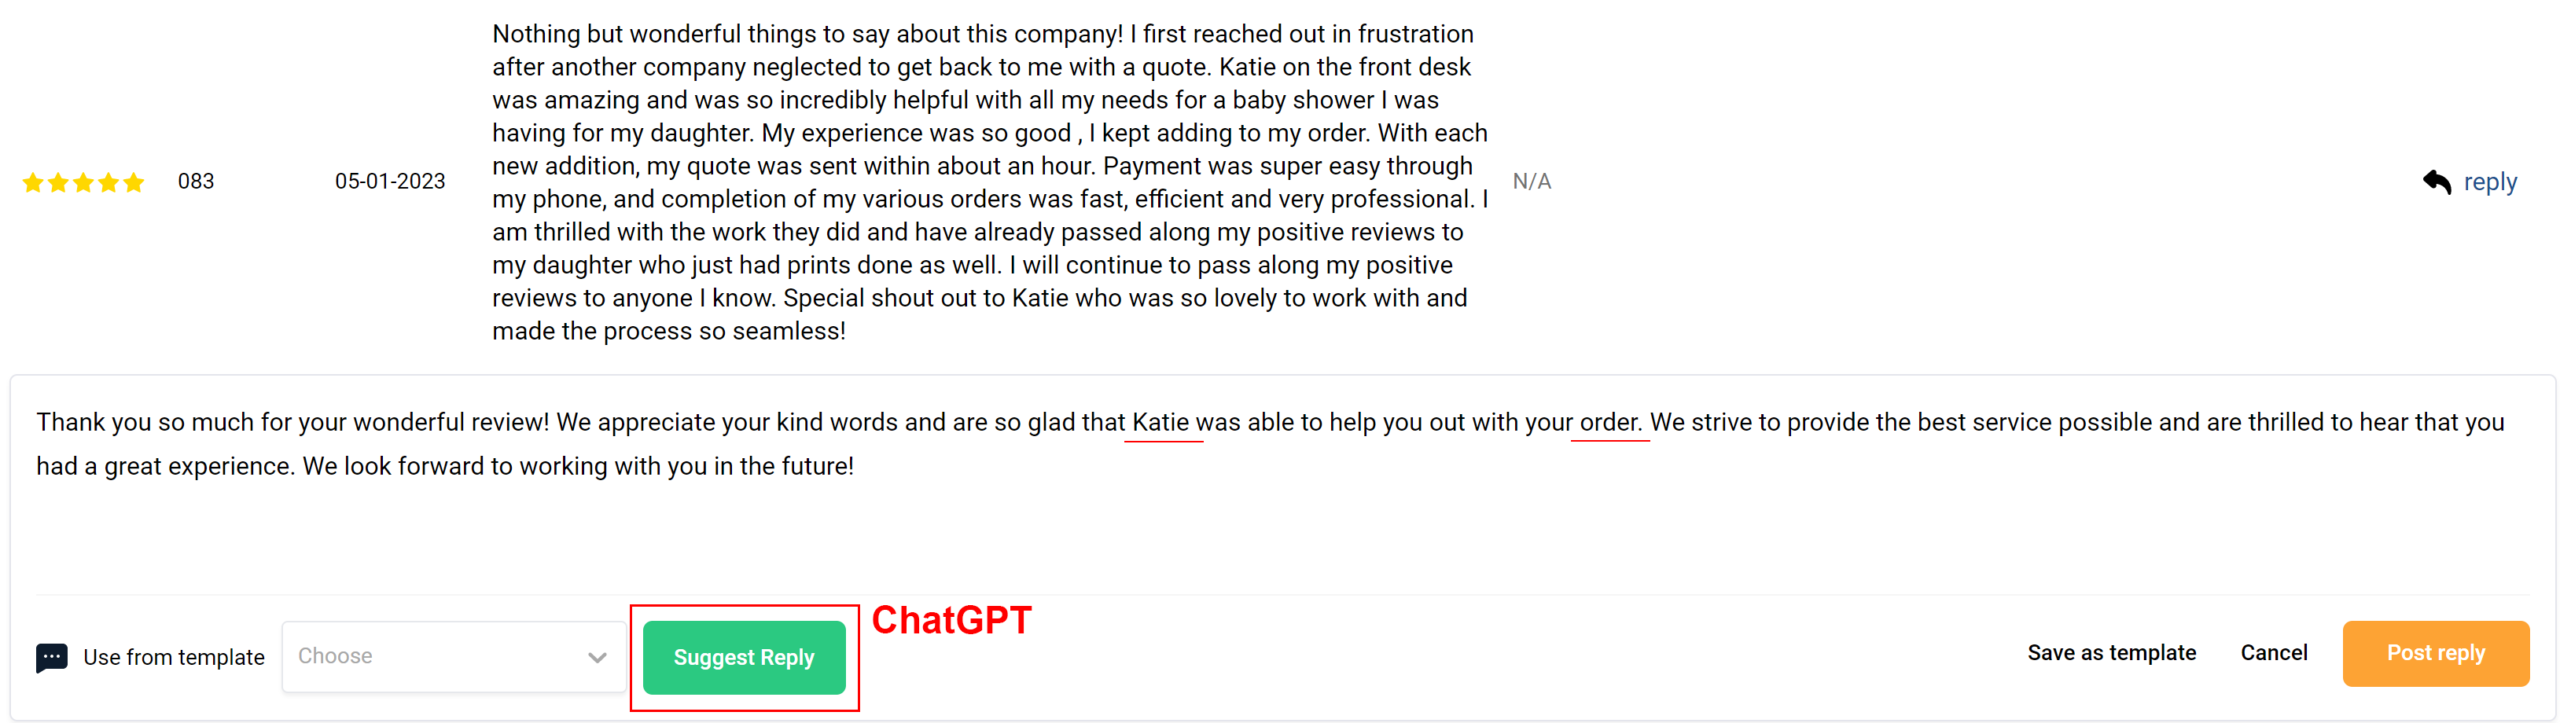 chatgpt reply to reviews